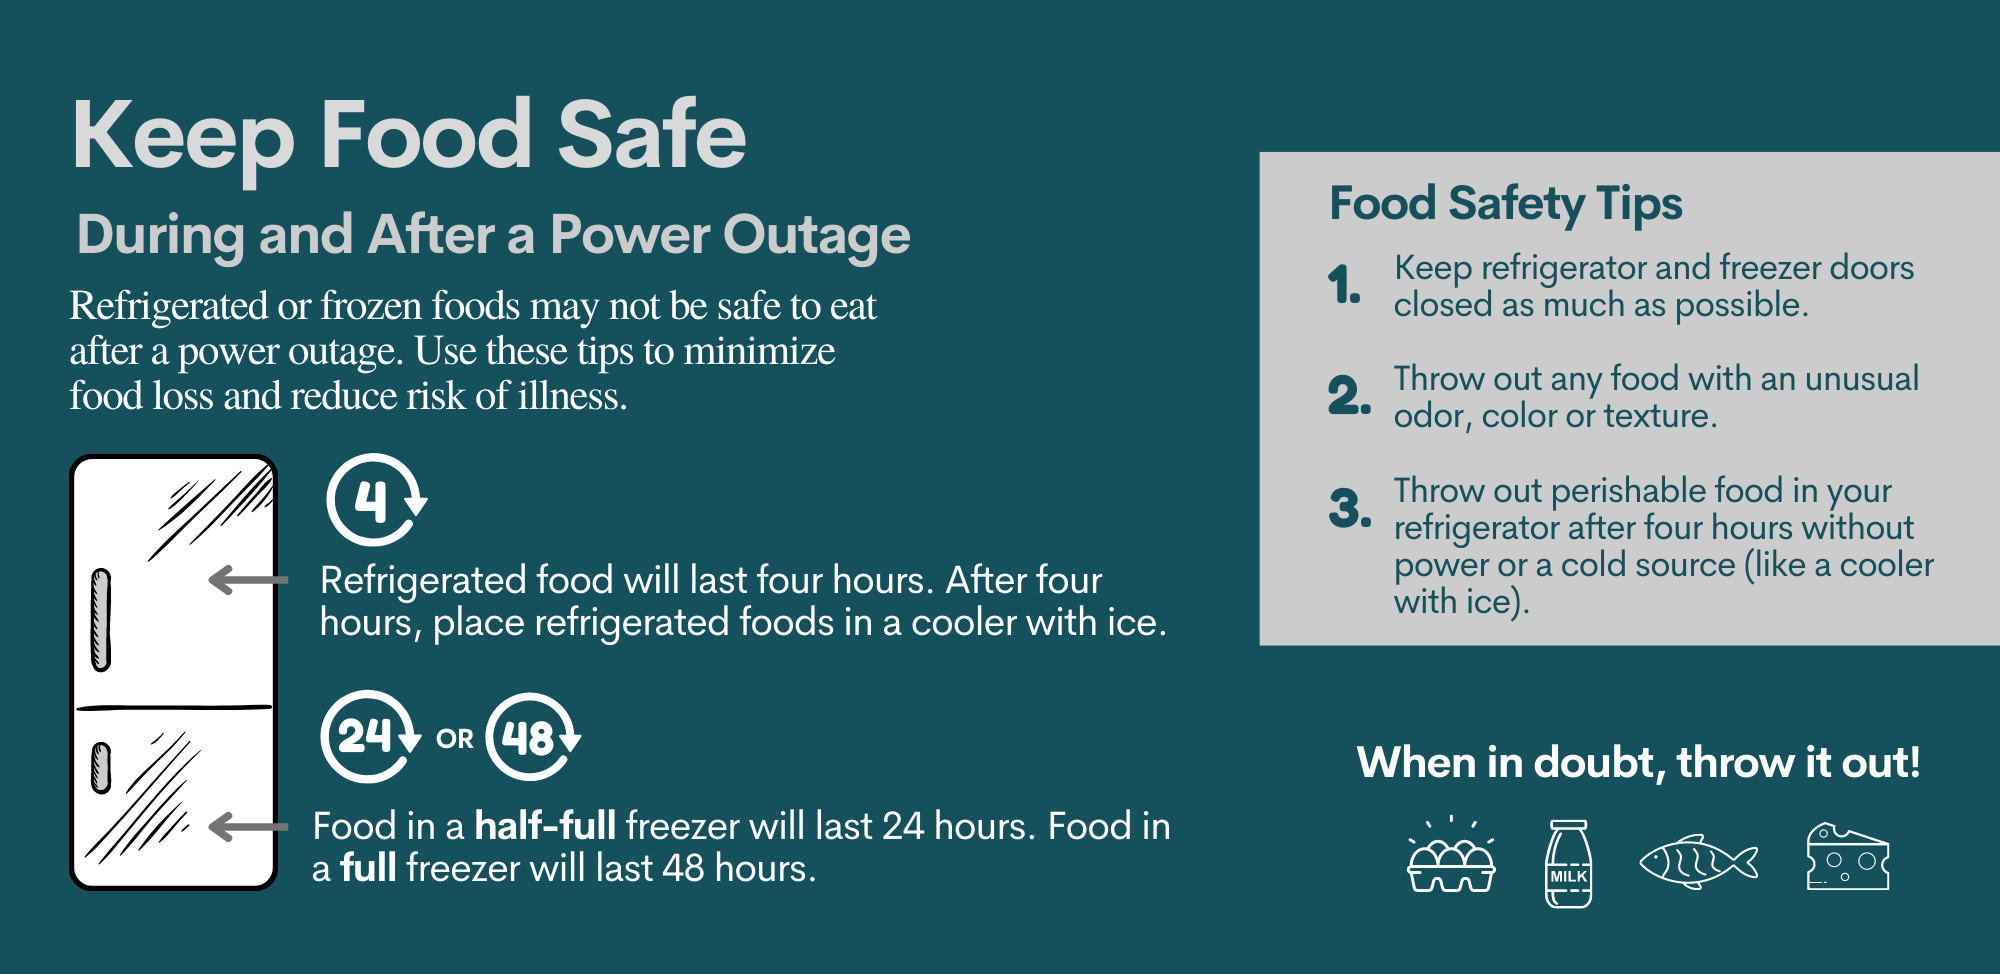 Ready - Keep your food supplies safe during a power outage: - Keep